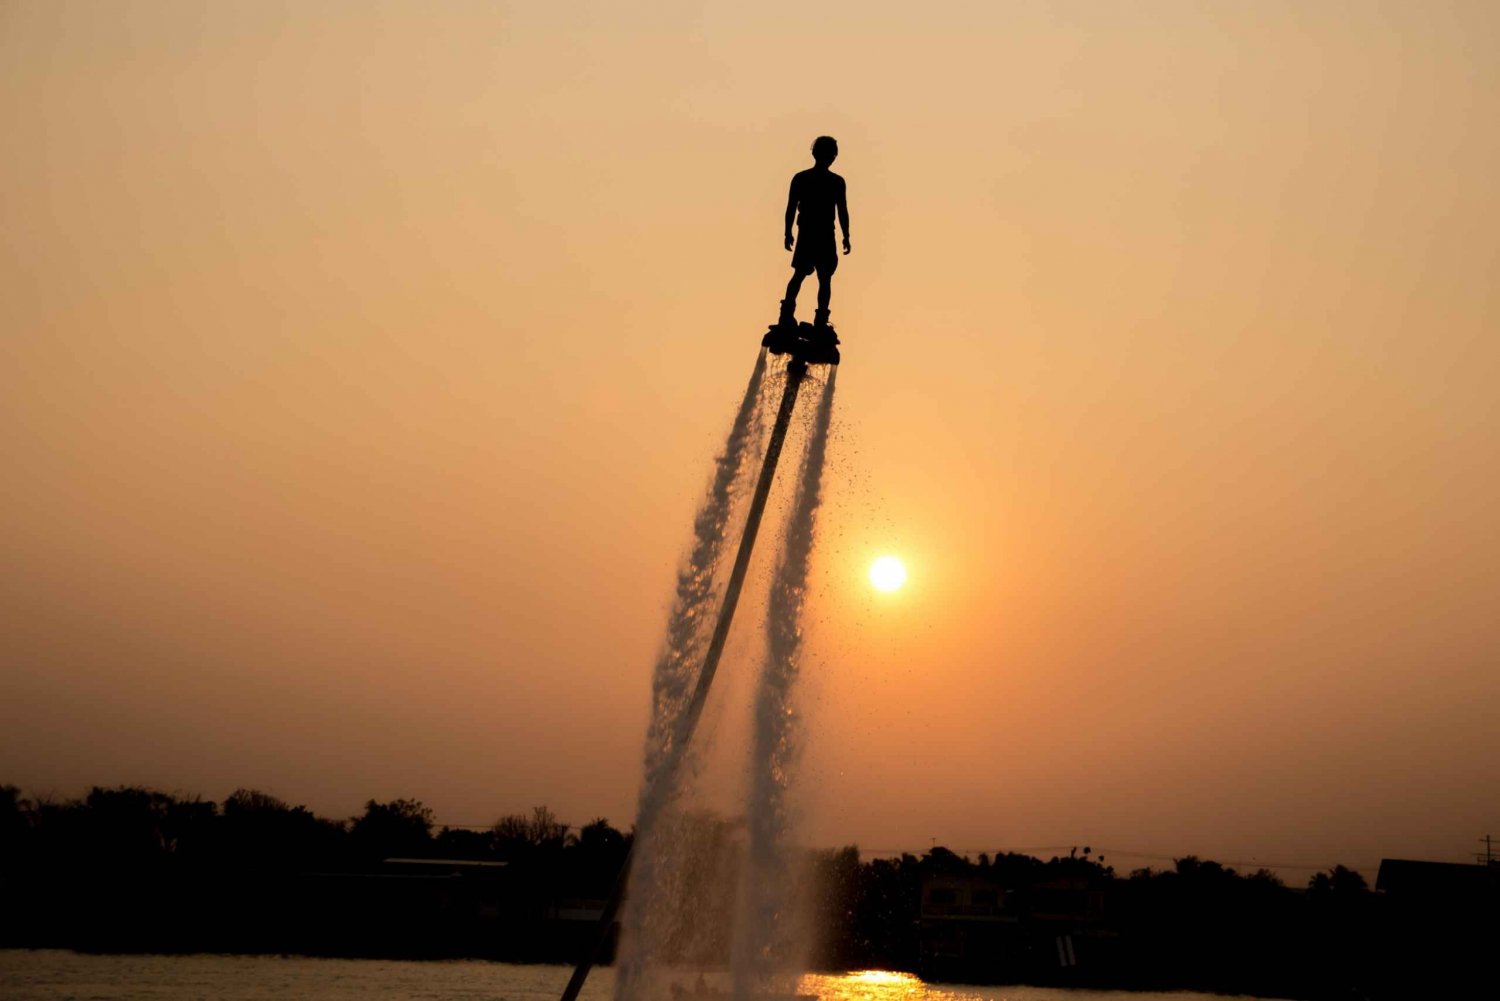 Amsterdam: 20-Minute Flyboard Experience